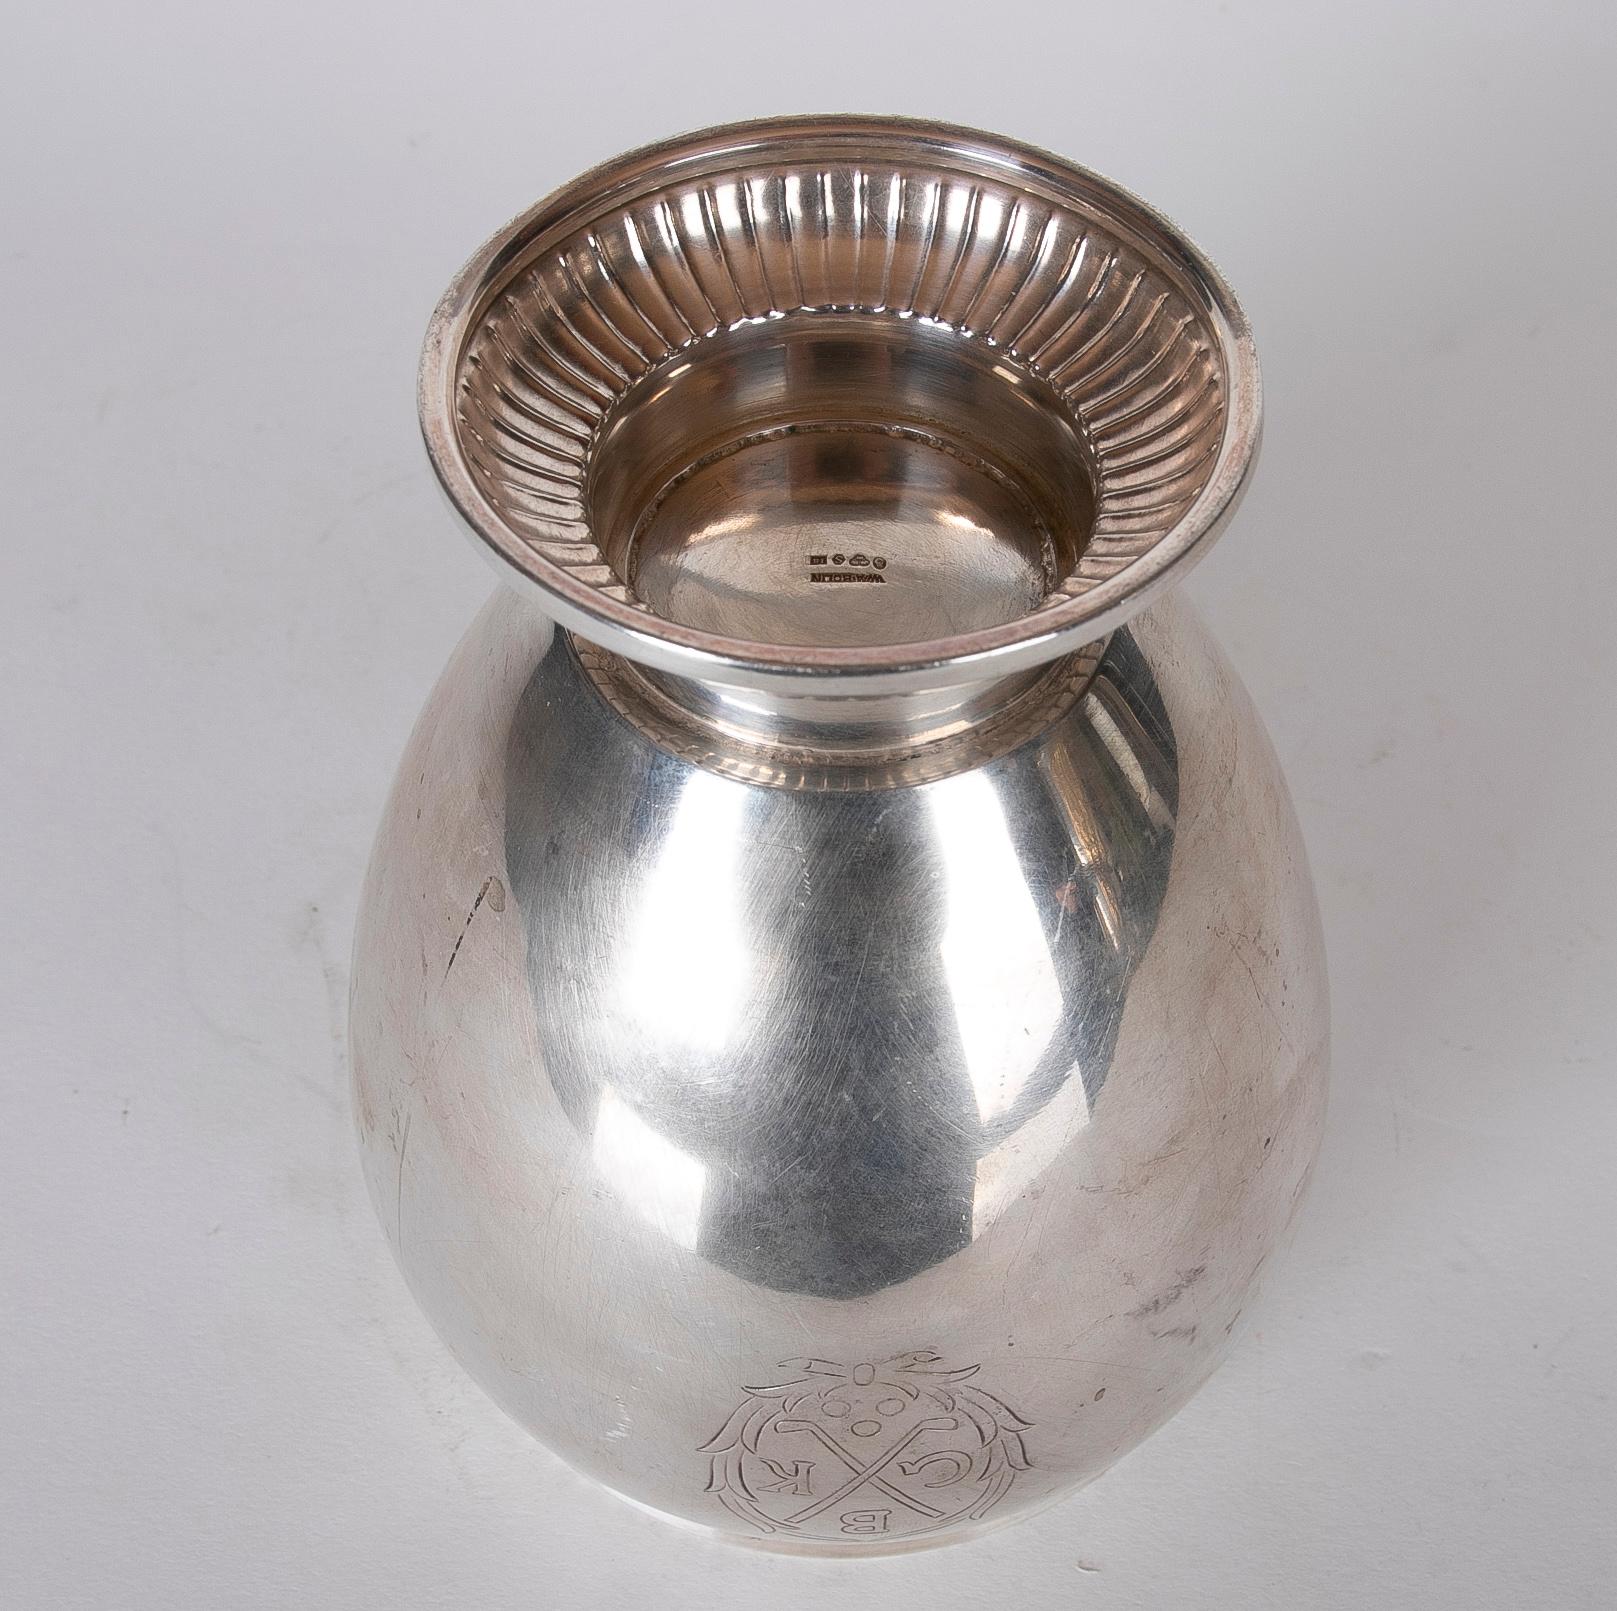 Silver Cup of the Russian House of Bolin with Decoration of Shield with Letterin For Sale 5